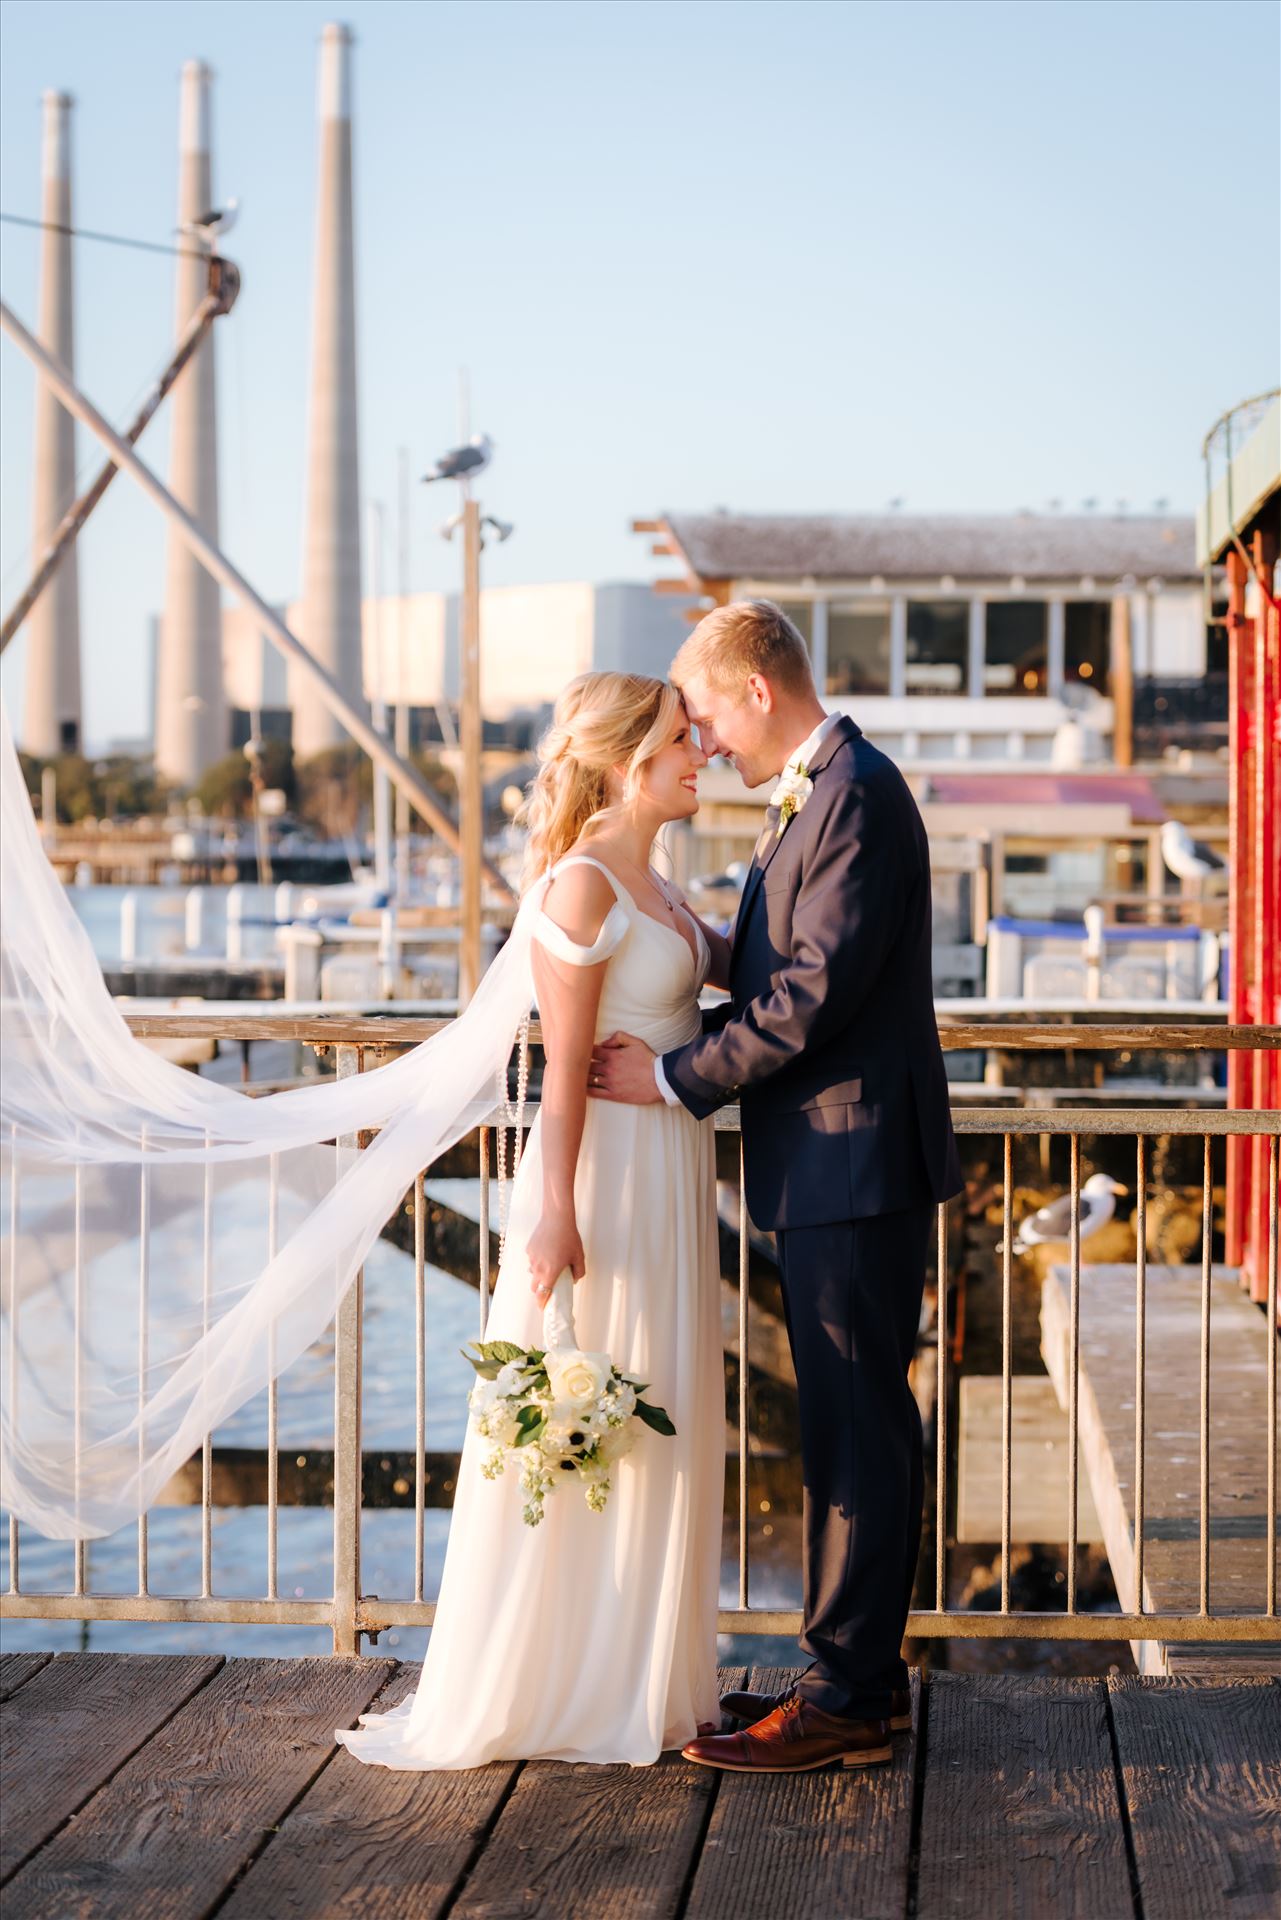 FW-8272.JPG Sarah Williams of Mirror's Edge Photography, a San Luis Obispo Wedding and Engagement Photographer, captures Ryan and Joanna's wedding at the iconic Windows on the Water Restaurant in Morro Bay, California.  Bride and Groom with bay in background. by Sarah Williams